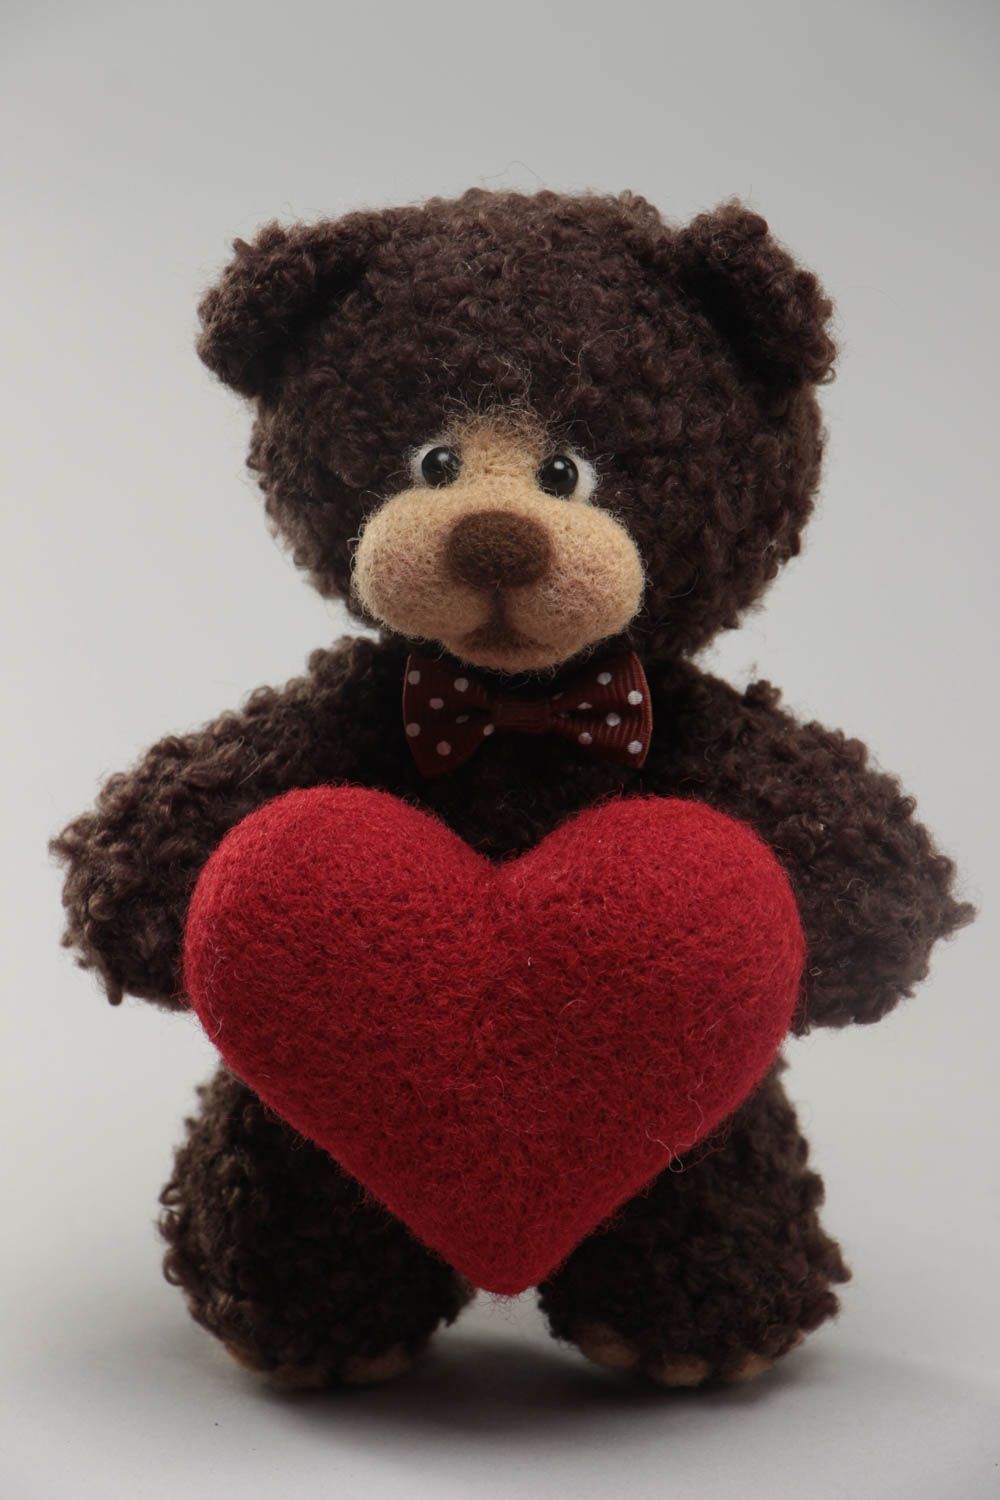 Handmade soft toy crocheted of wool and yarns brown bear with big red heart photo 2